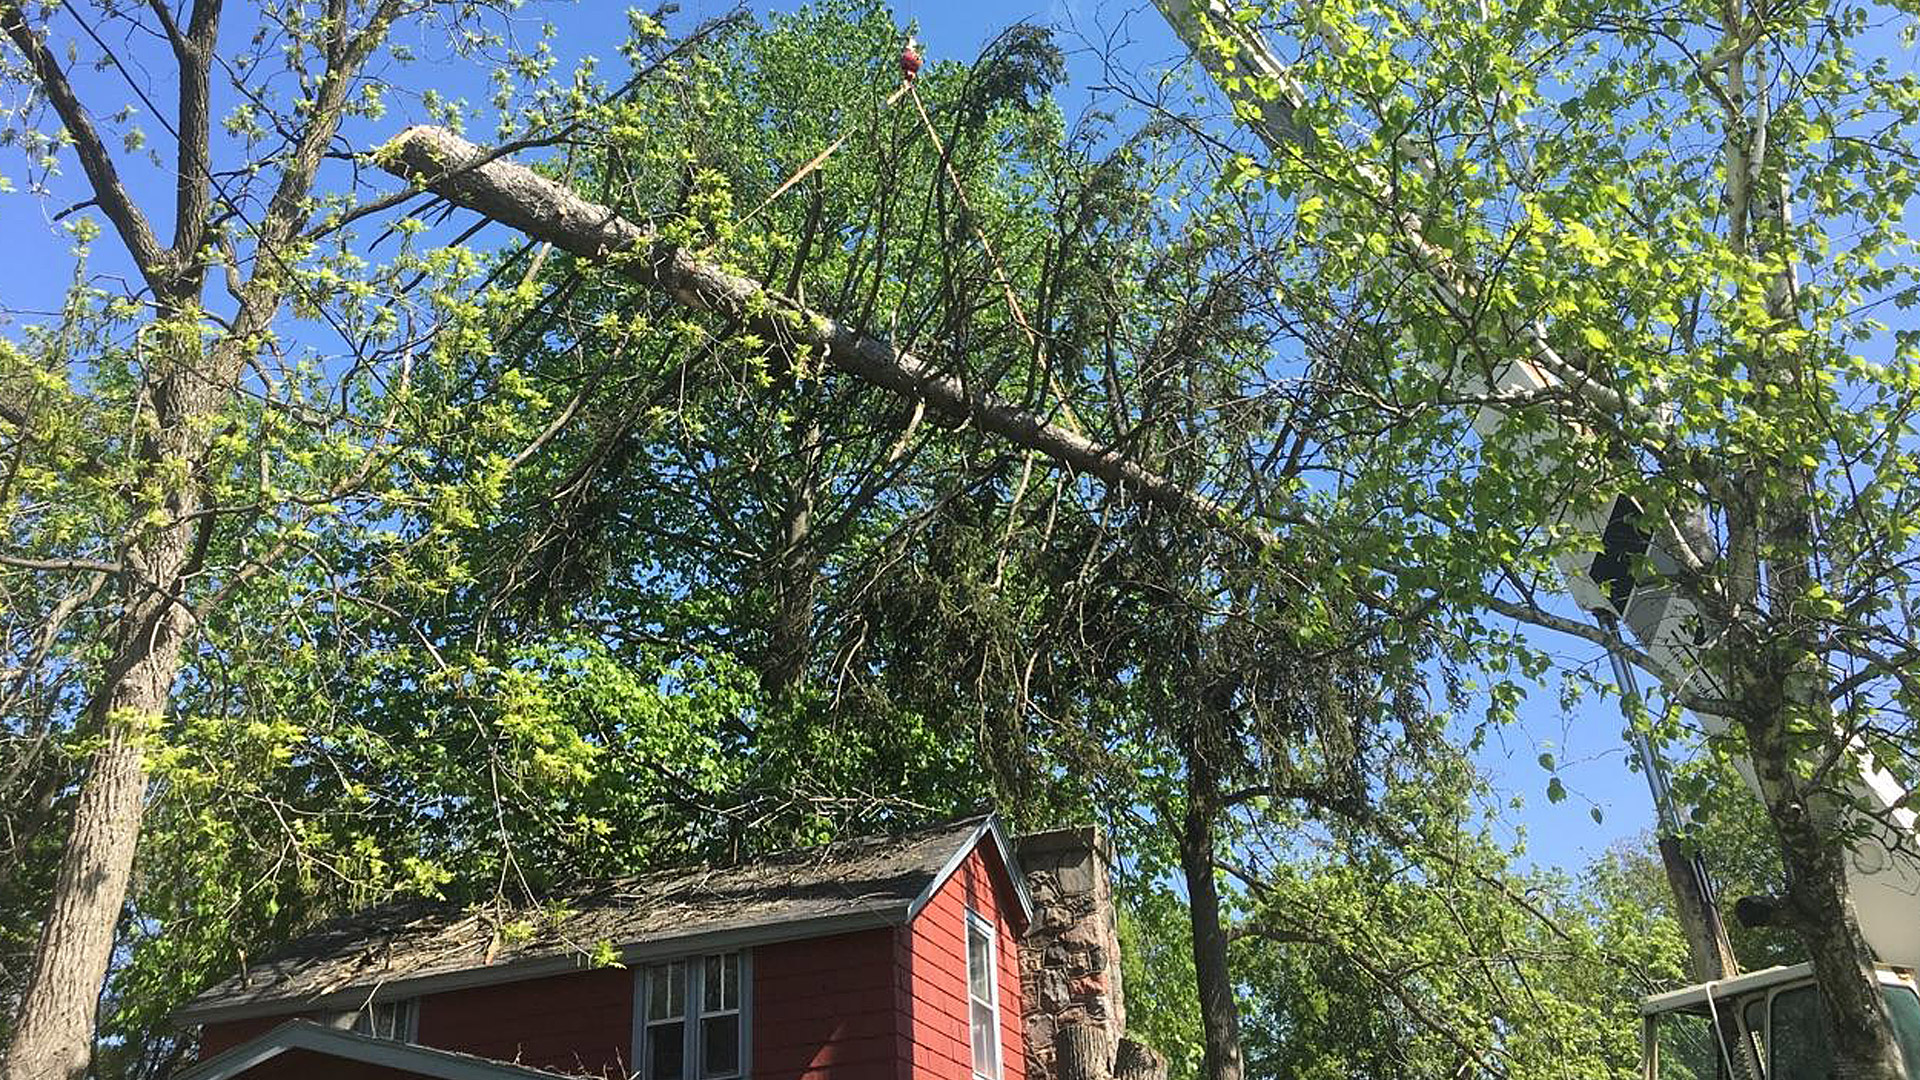 Residential tree removal services